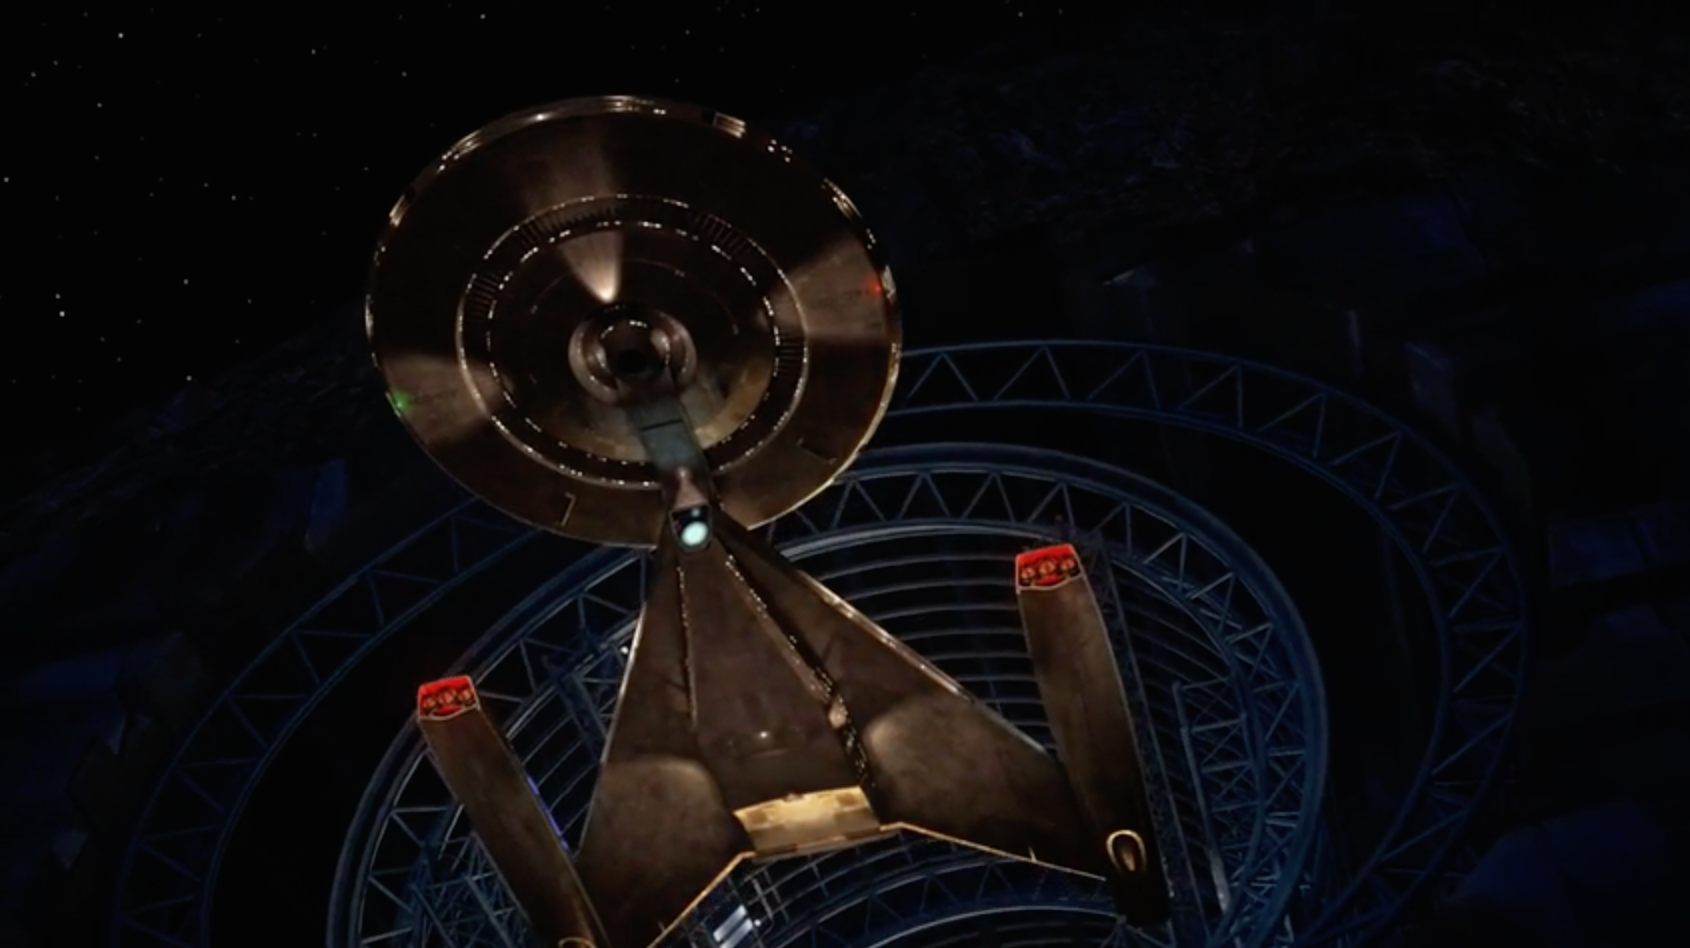 CBS Will Let You Watch New Star Trek Show Without Commercials… For $4/Month More